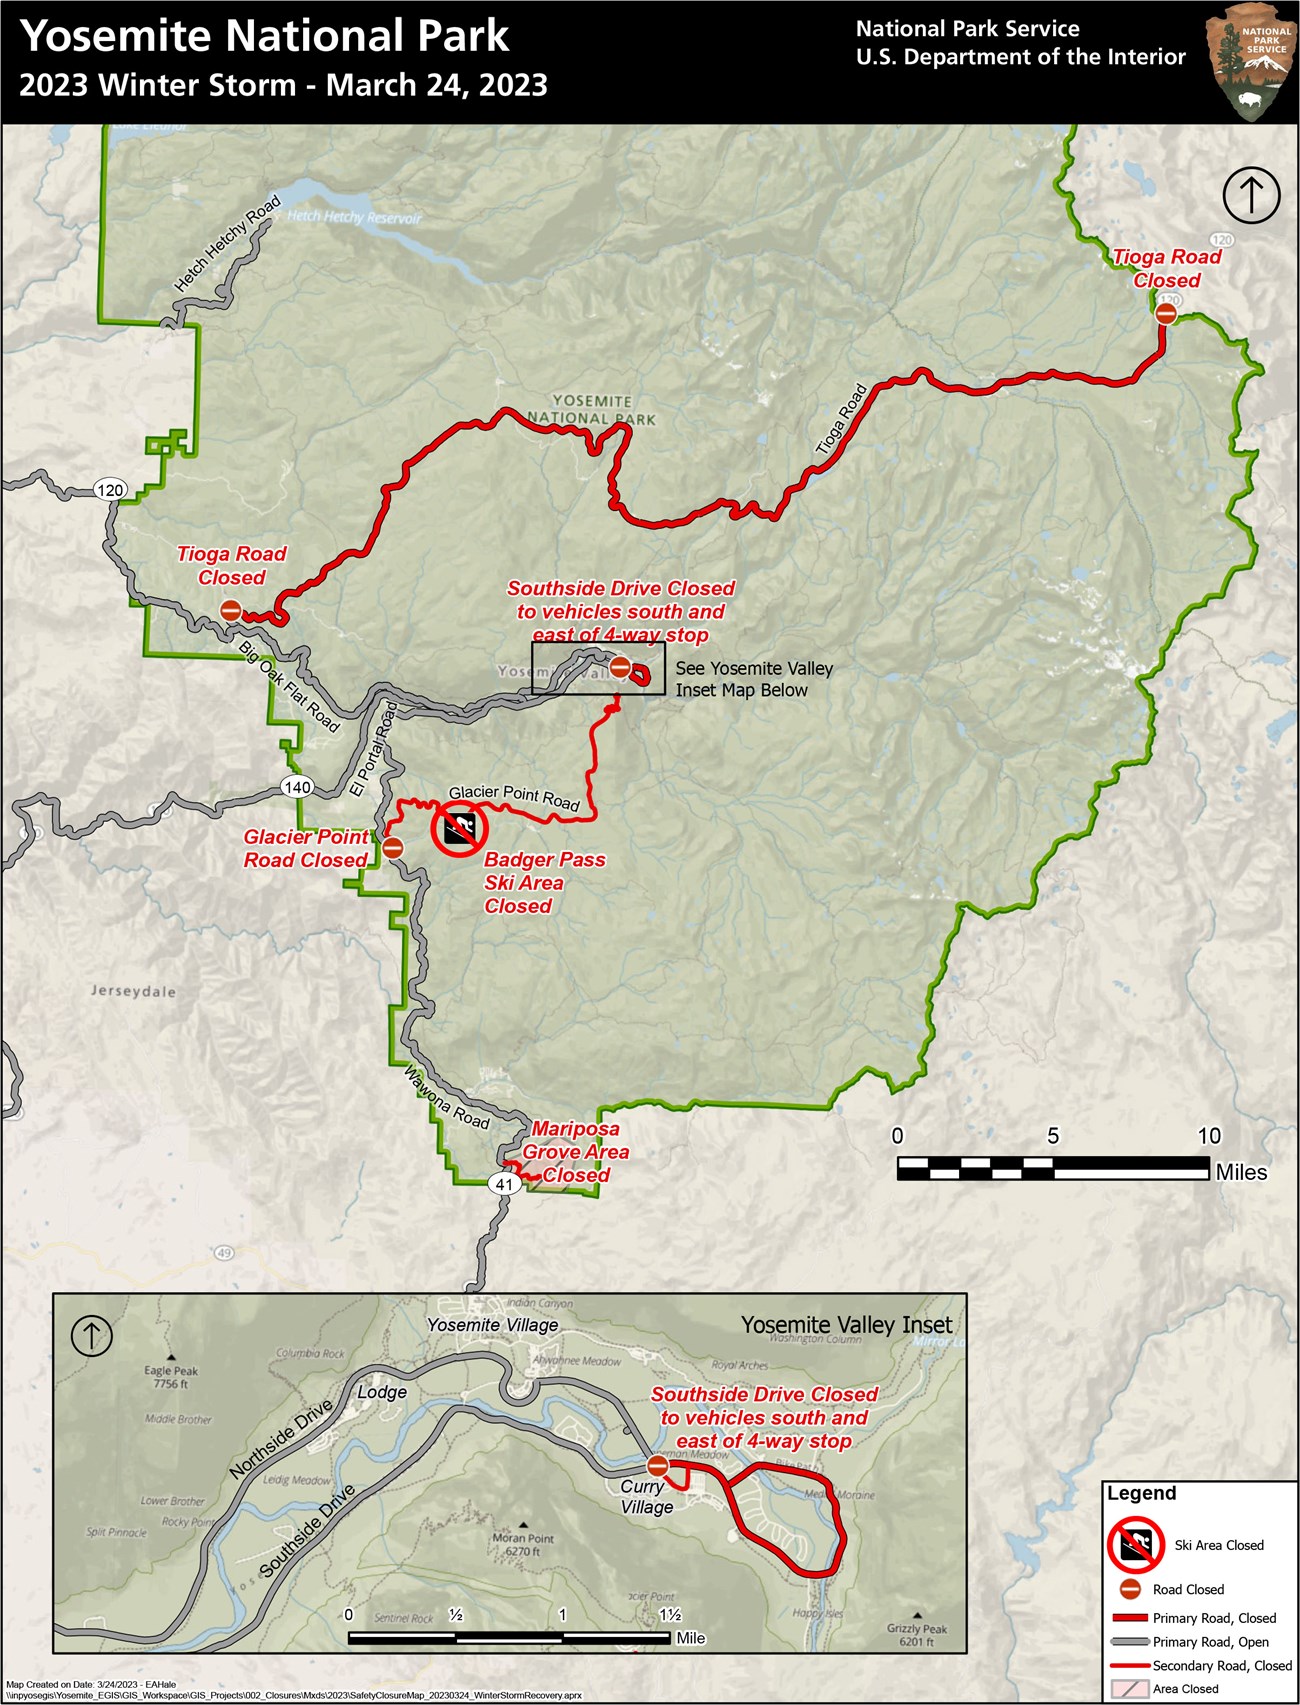 Map of Yosemite National Park showing Tioga Road, Glacier Point Road, roads in Yosemite Valley from Curry Village eastward as closed; Mariposa Grove area also closed